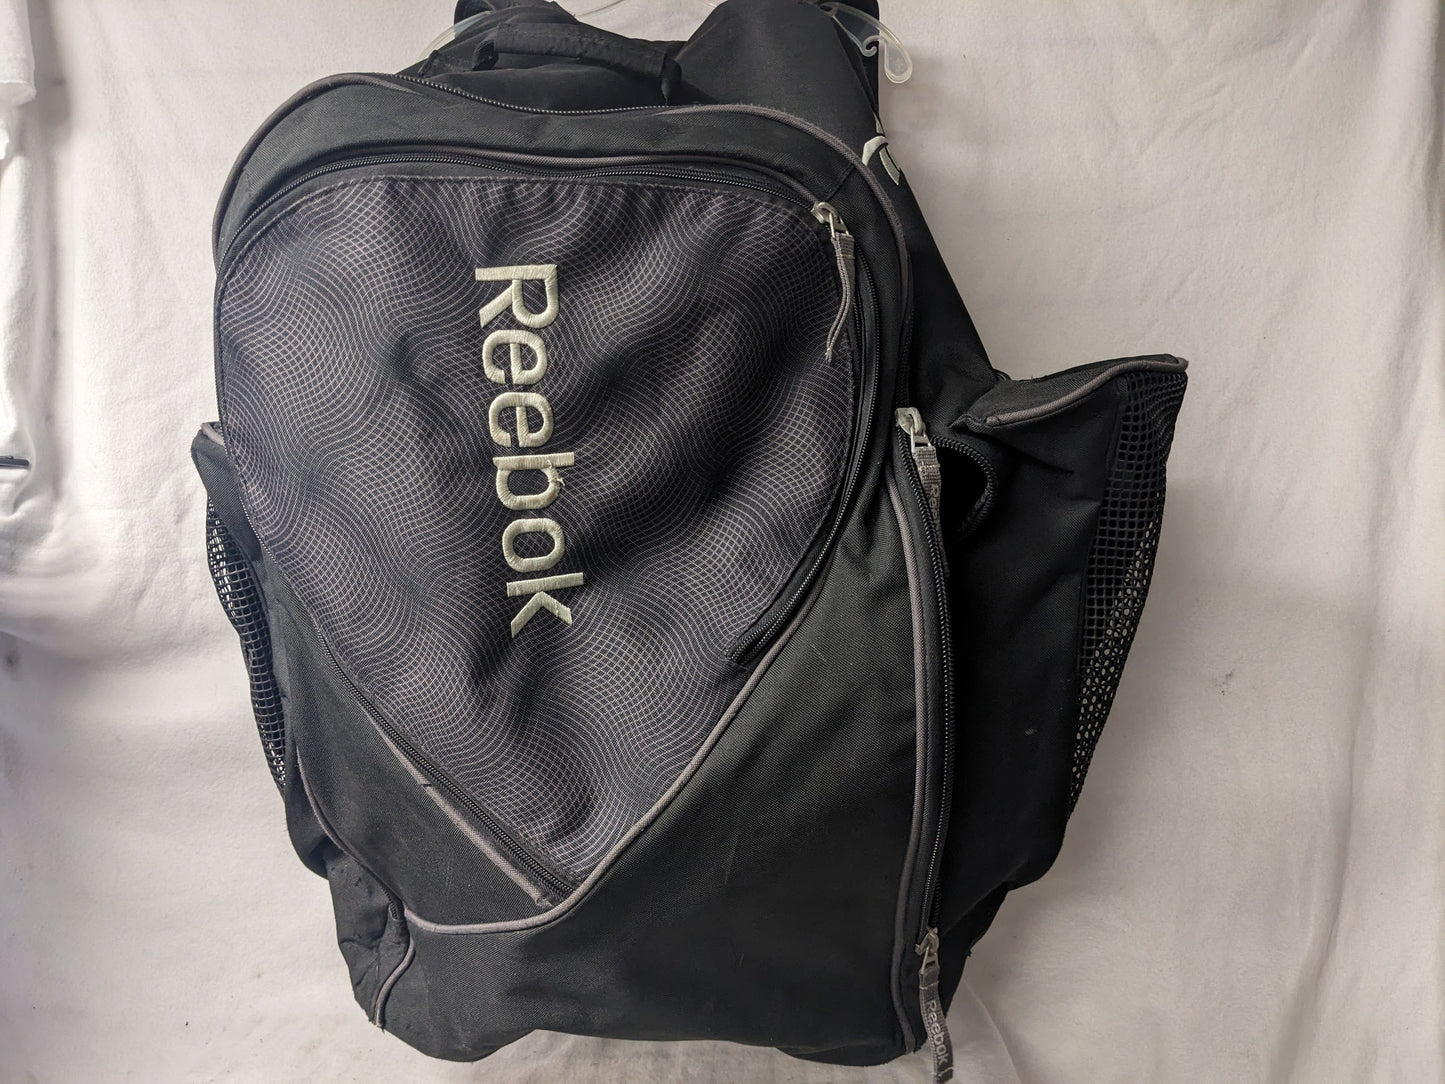 Reebok Hockey Gear Backpack/Duffle Bag Size Large Color Black Condition Used